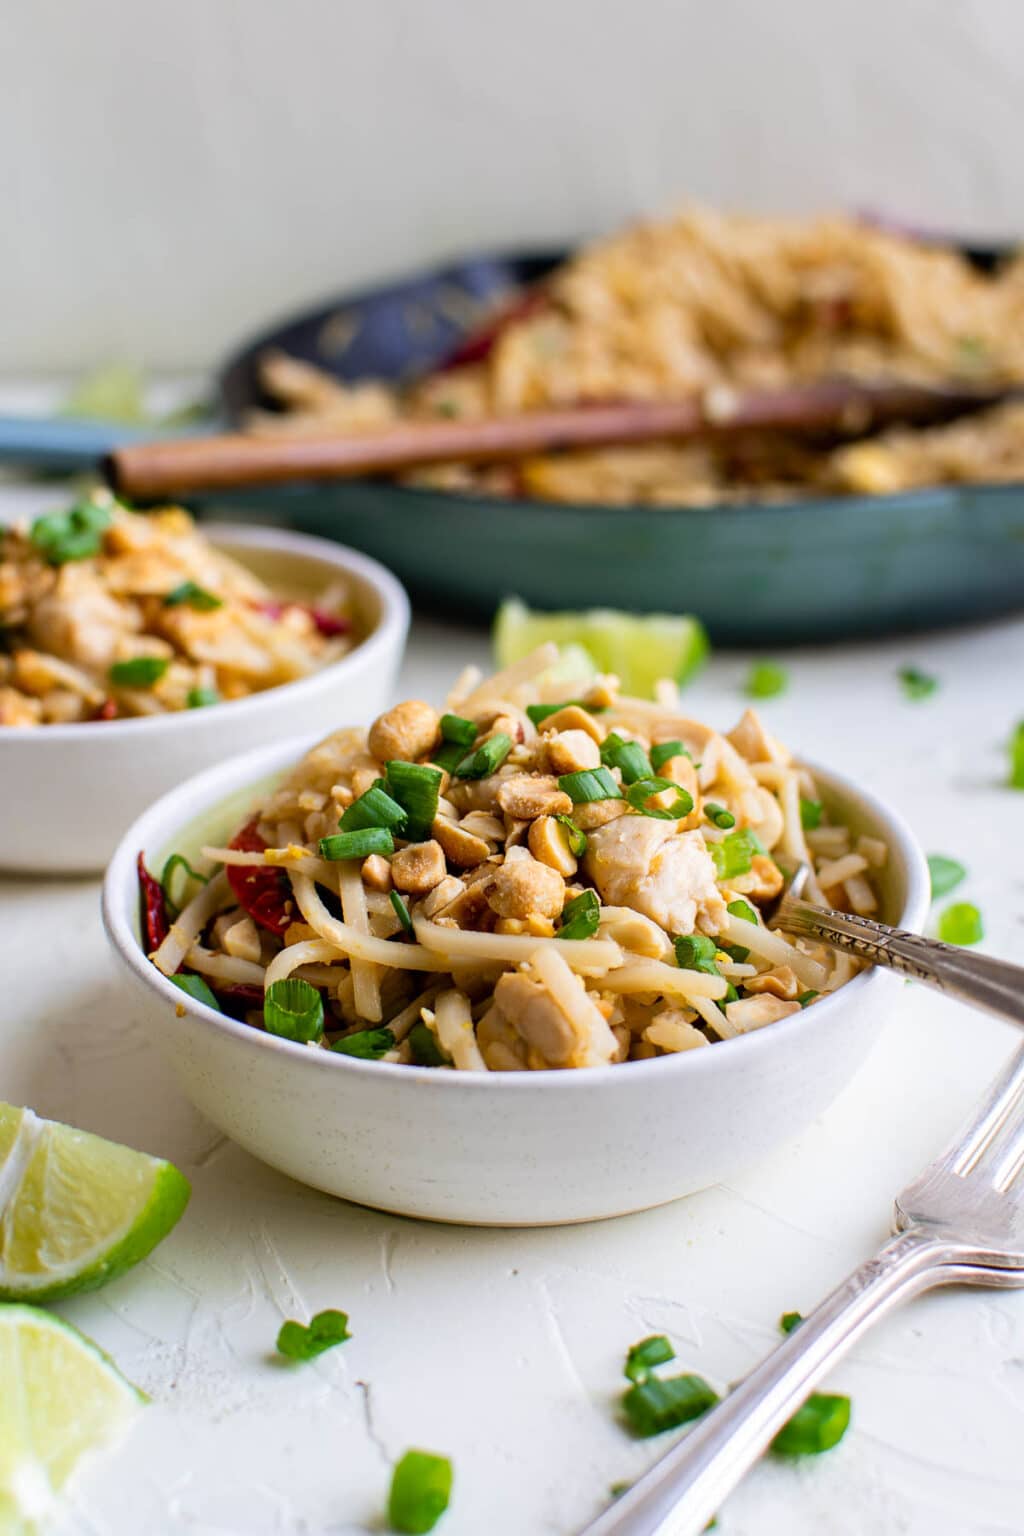 Chicken Pad Thai recipe - Take Out at Home - Boulder Locavore